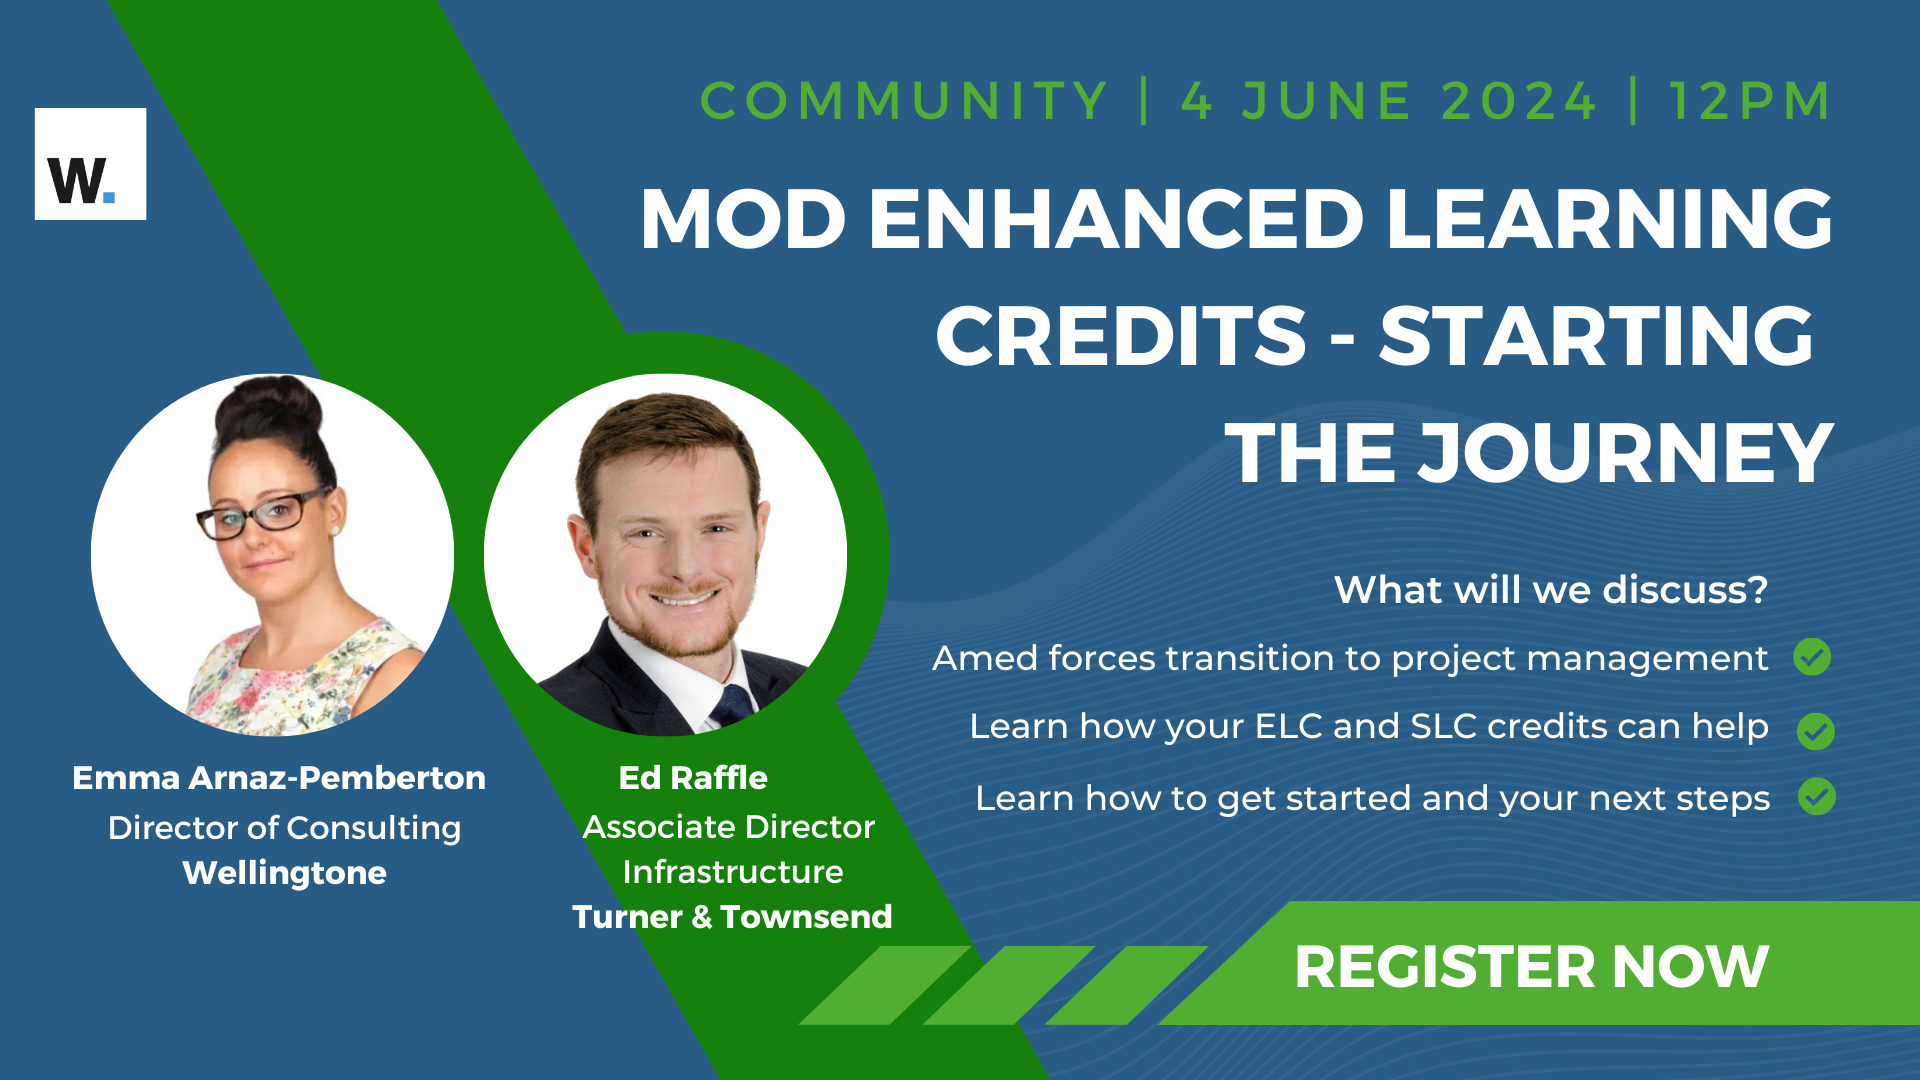 MOD Enhanced Learning Credits - Starting the Journey Community Event